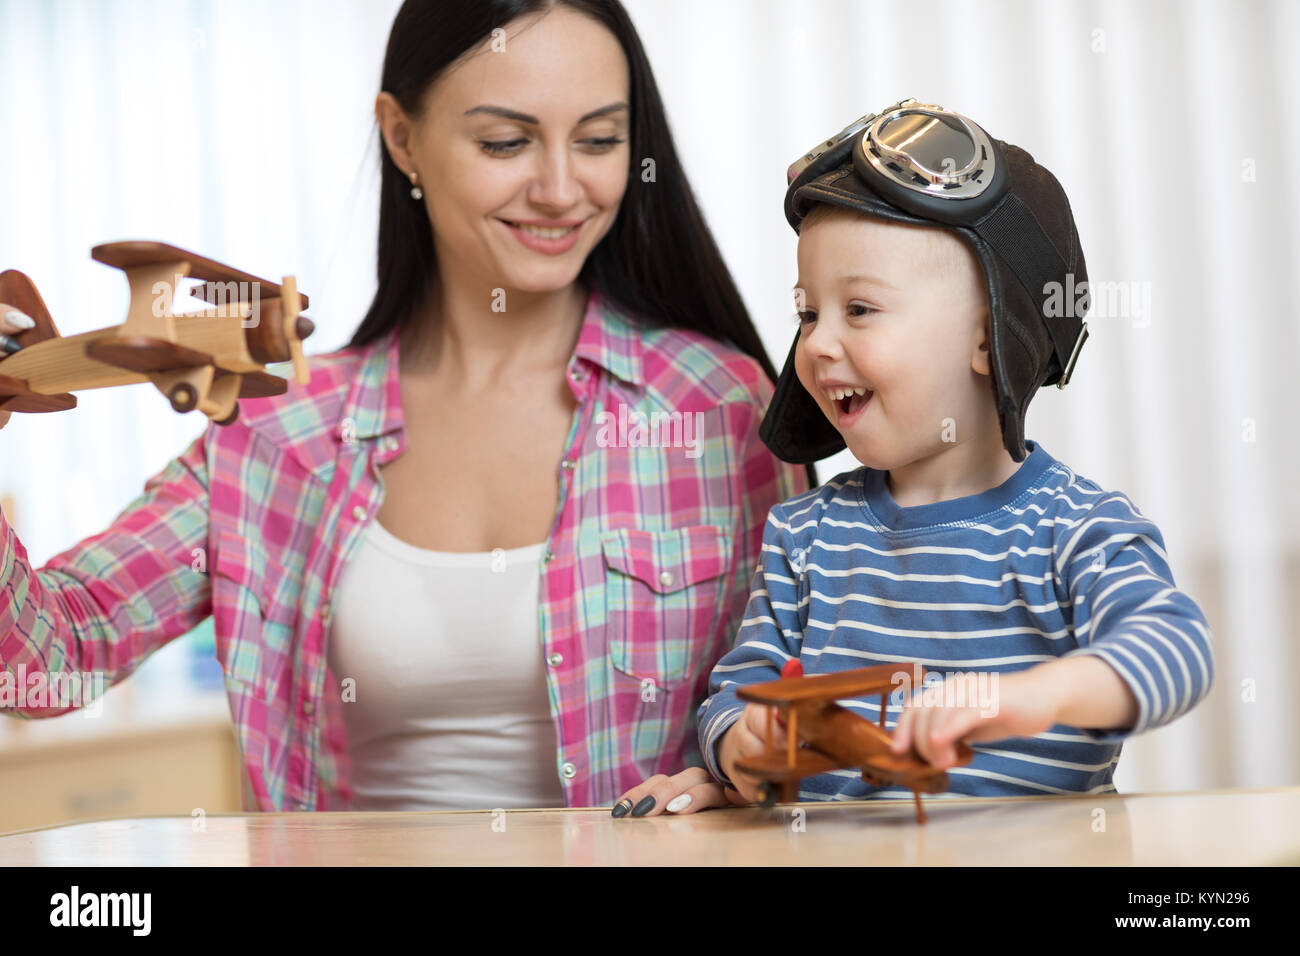 Mother and child son are playing with wooden planes. Stock Photo